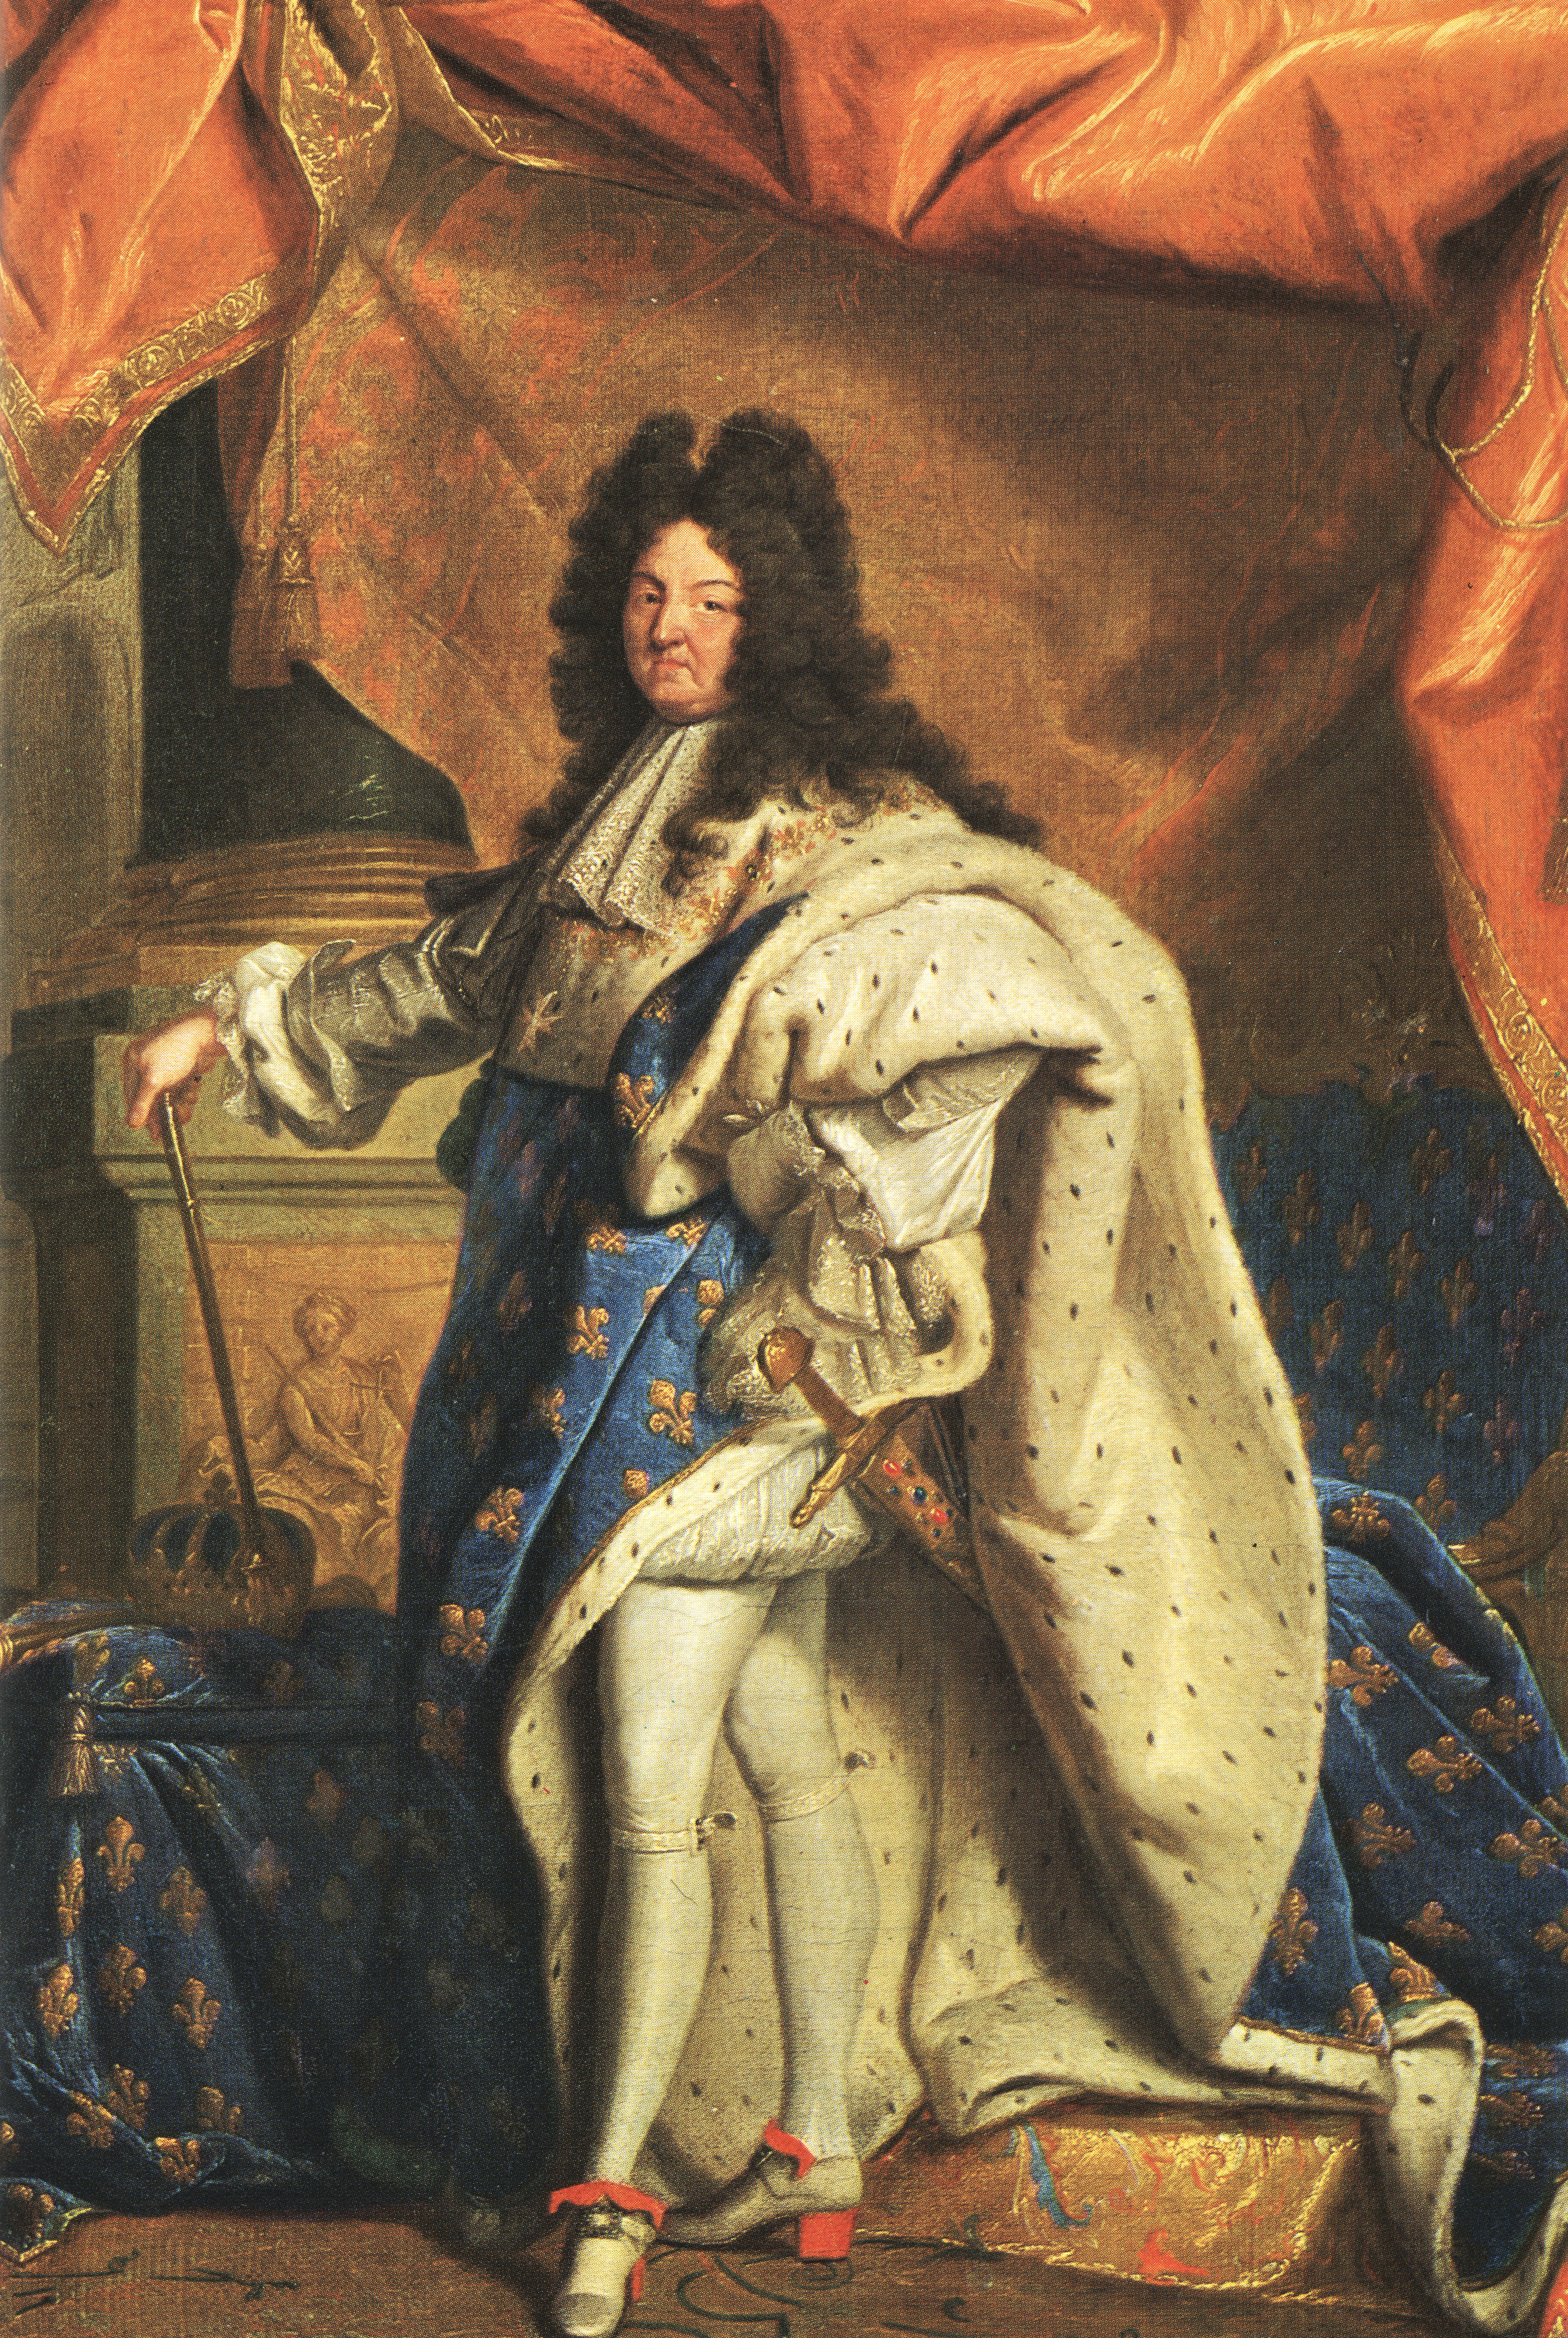 A painting of King Louis XIV